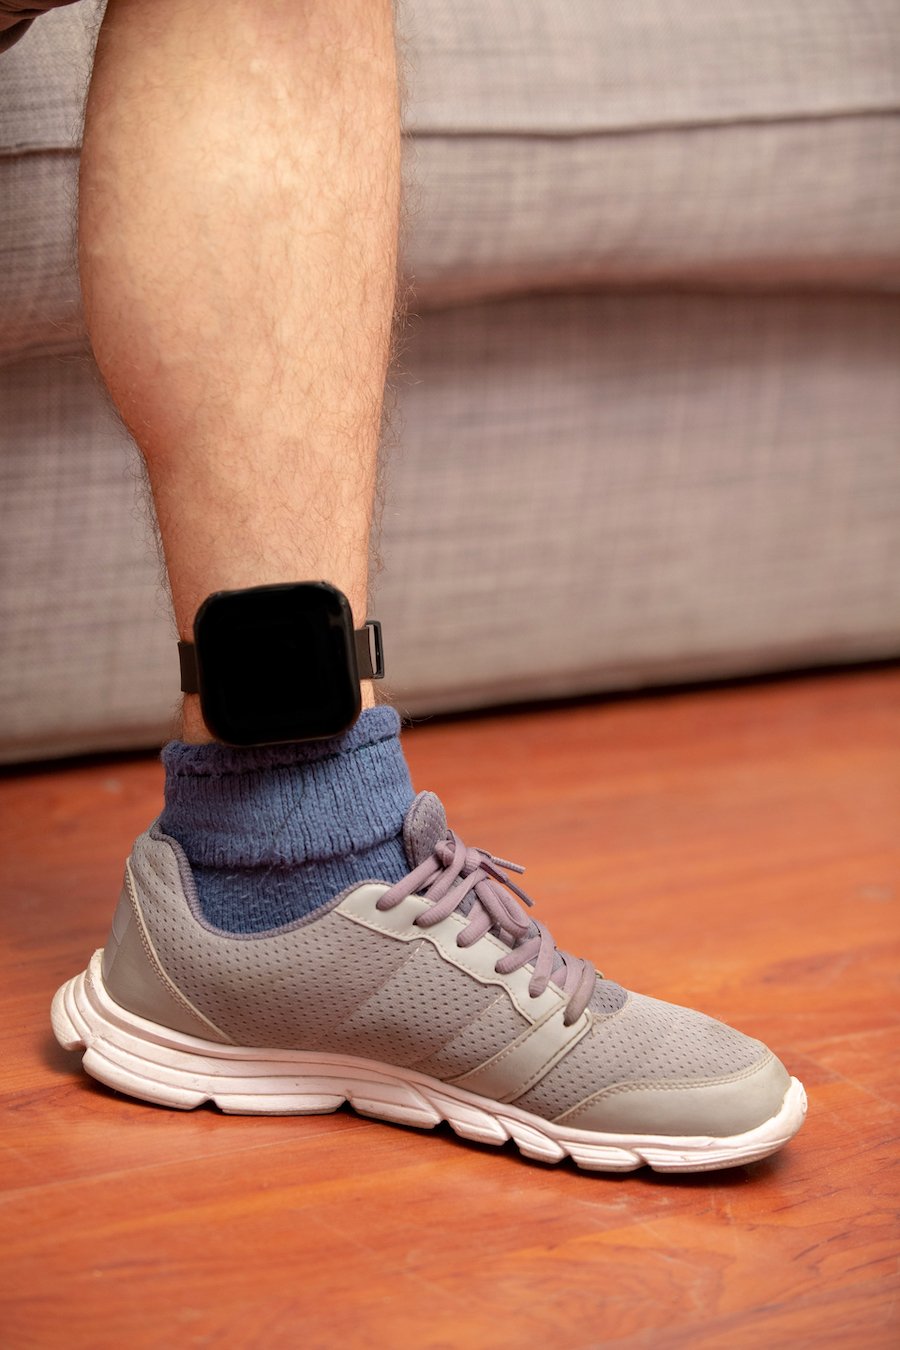 Ankle with an electronic monitoring bracele